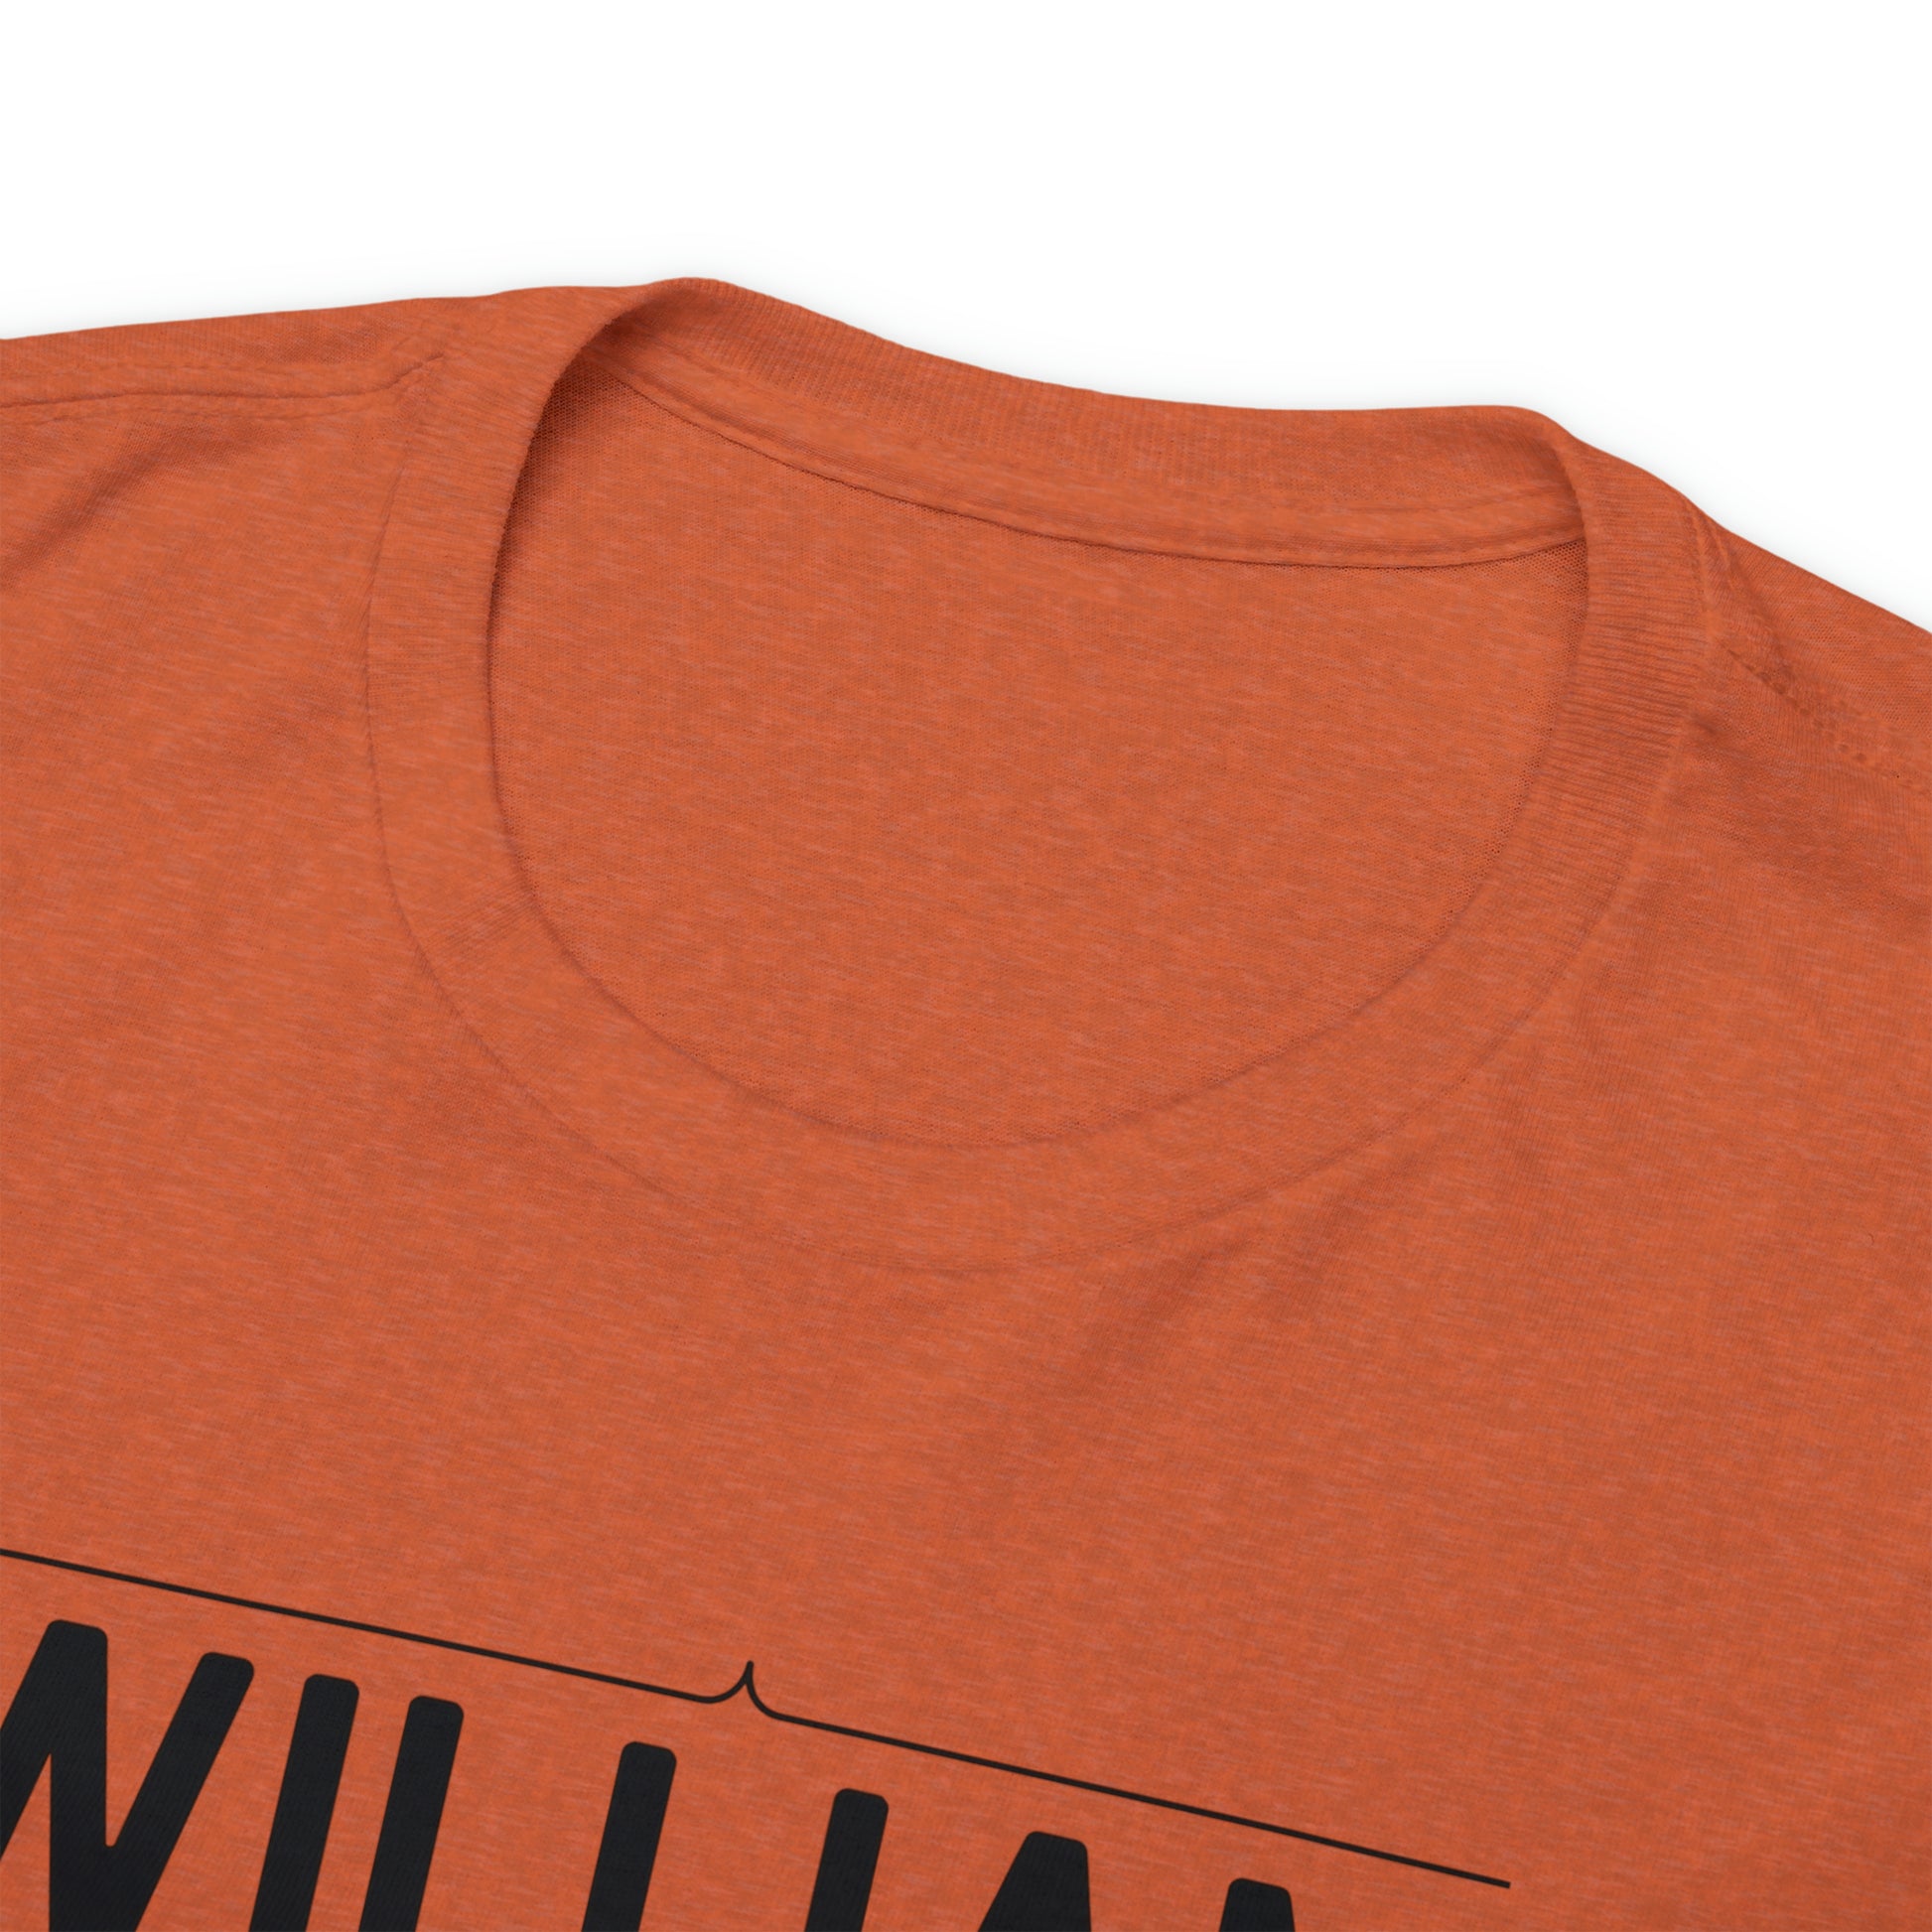 "William Knows Everything" T-shirt - Weave Got Gifts - Unique Gifts You Won’t Find Anywhere Else!